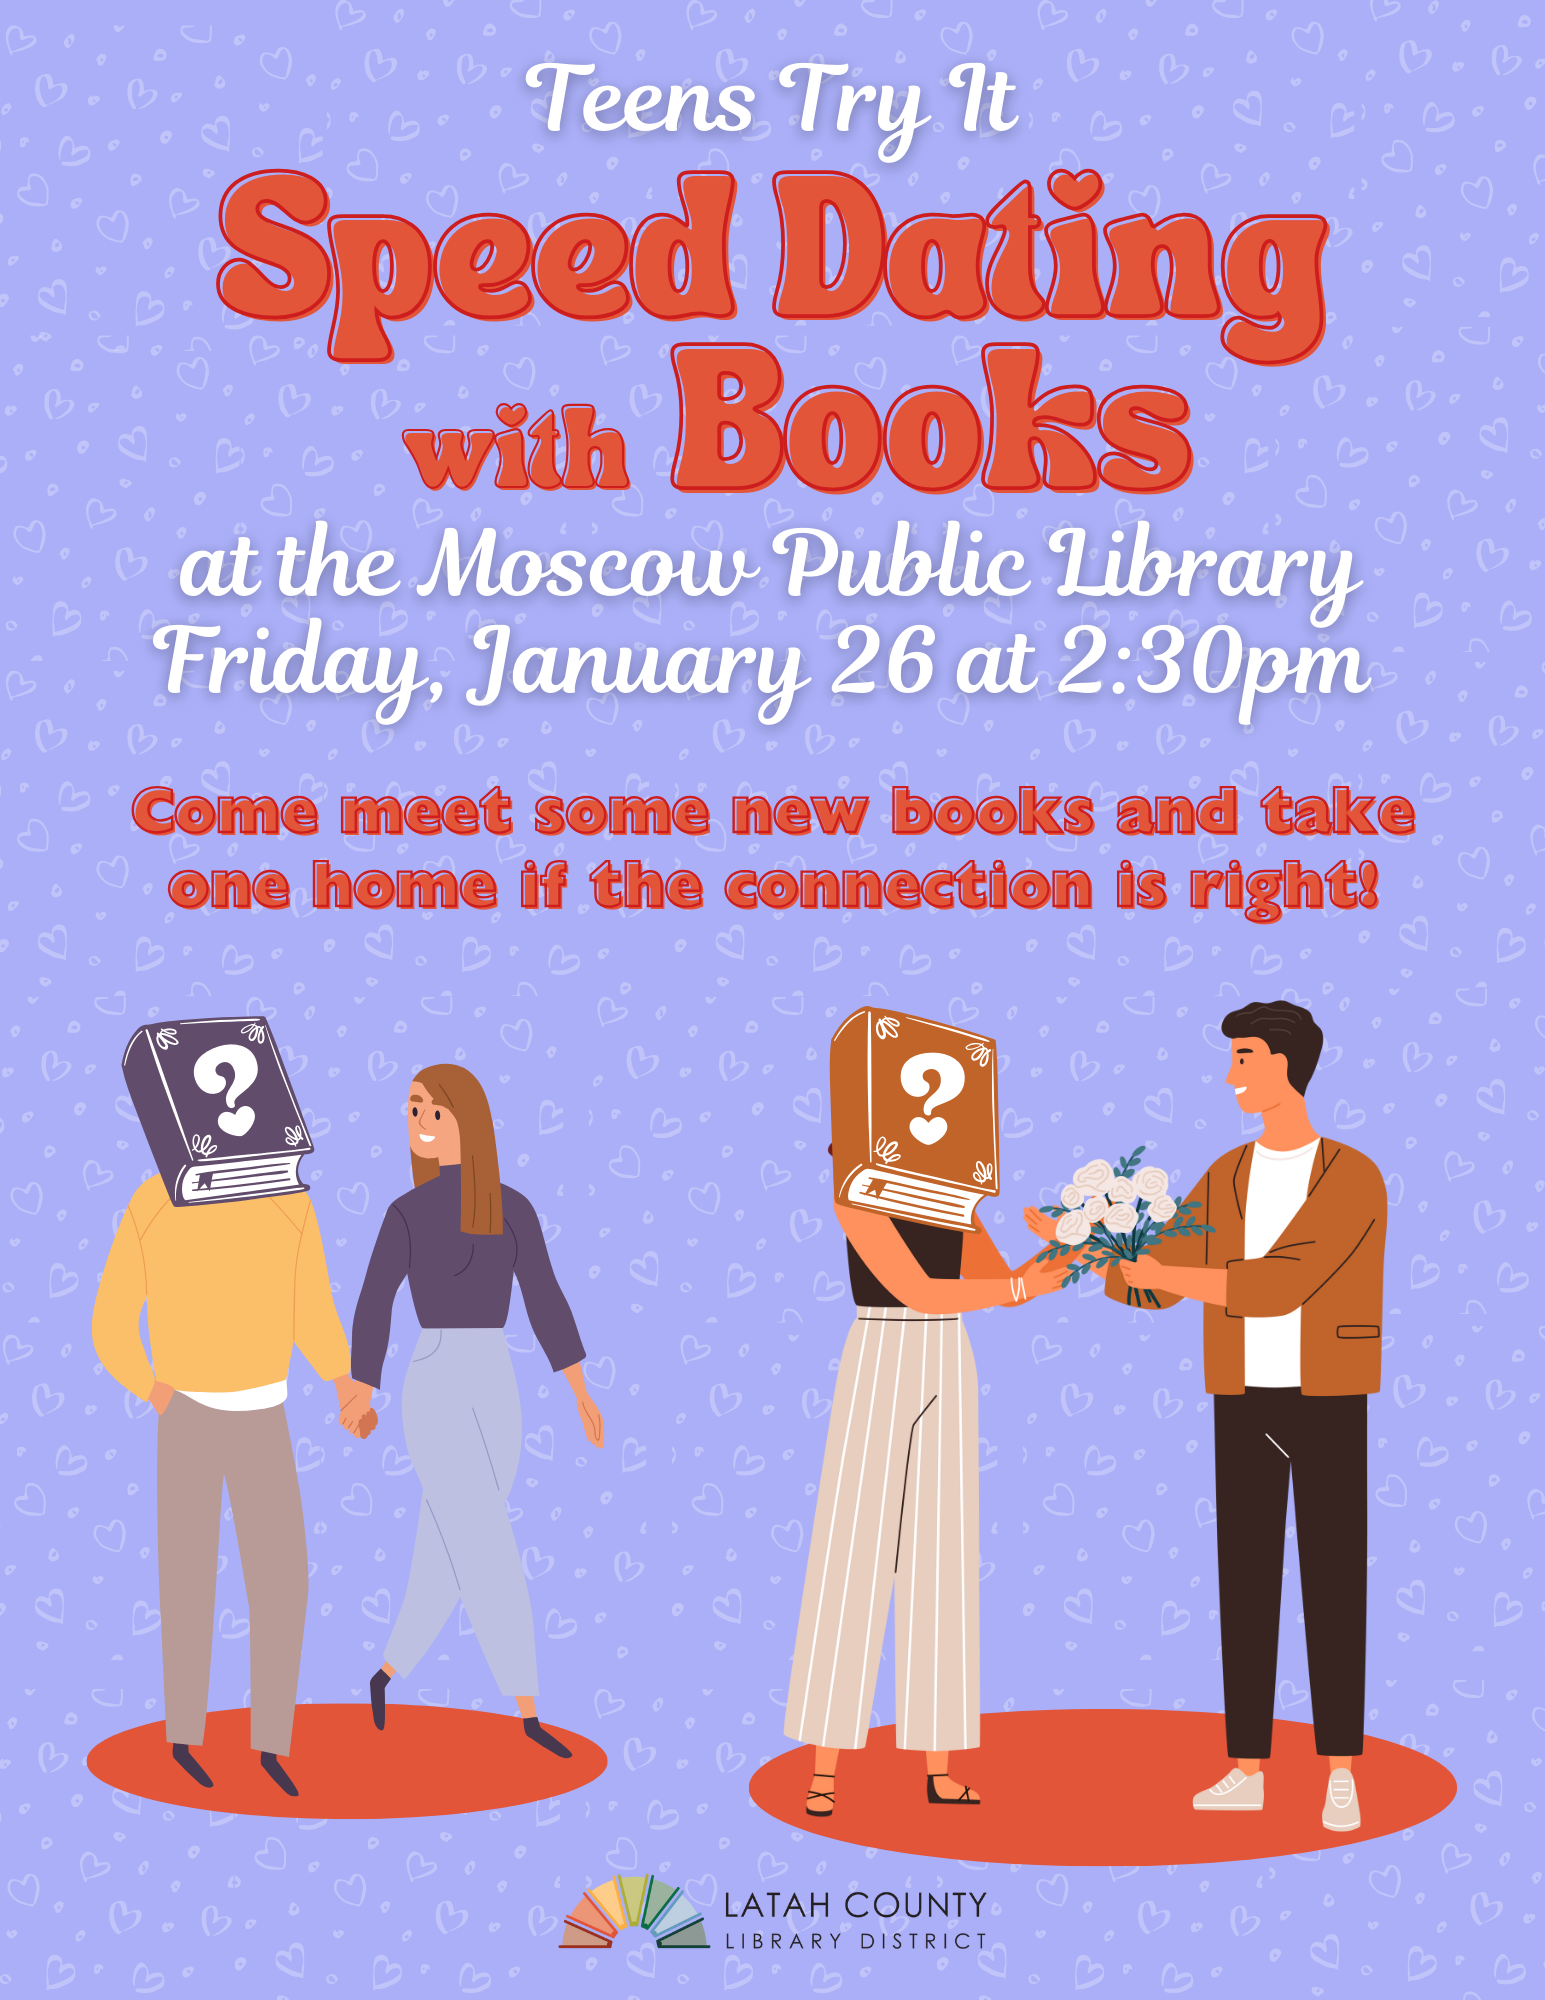 Speed Dating with Books at the Moscow Public Library